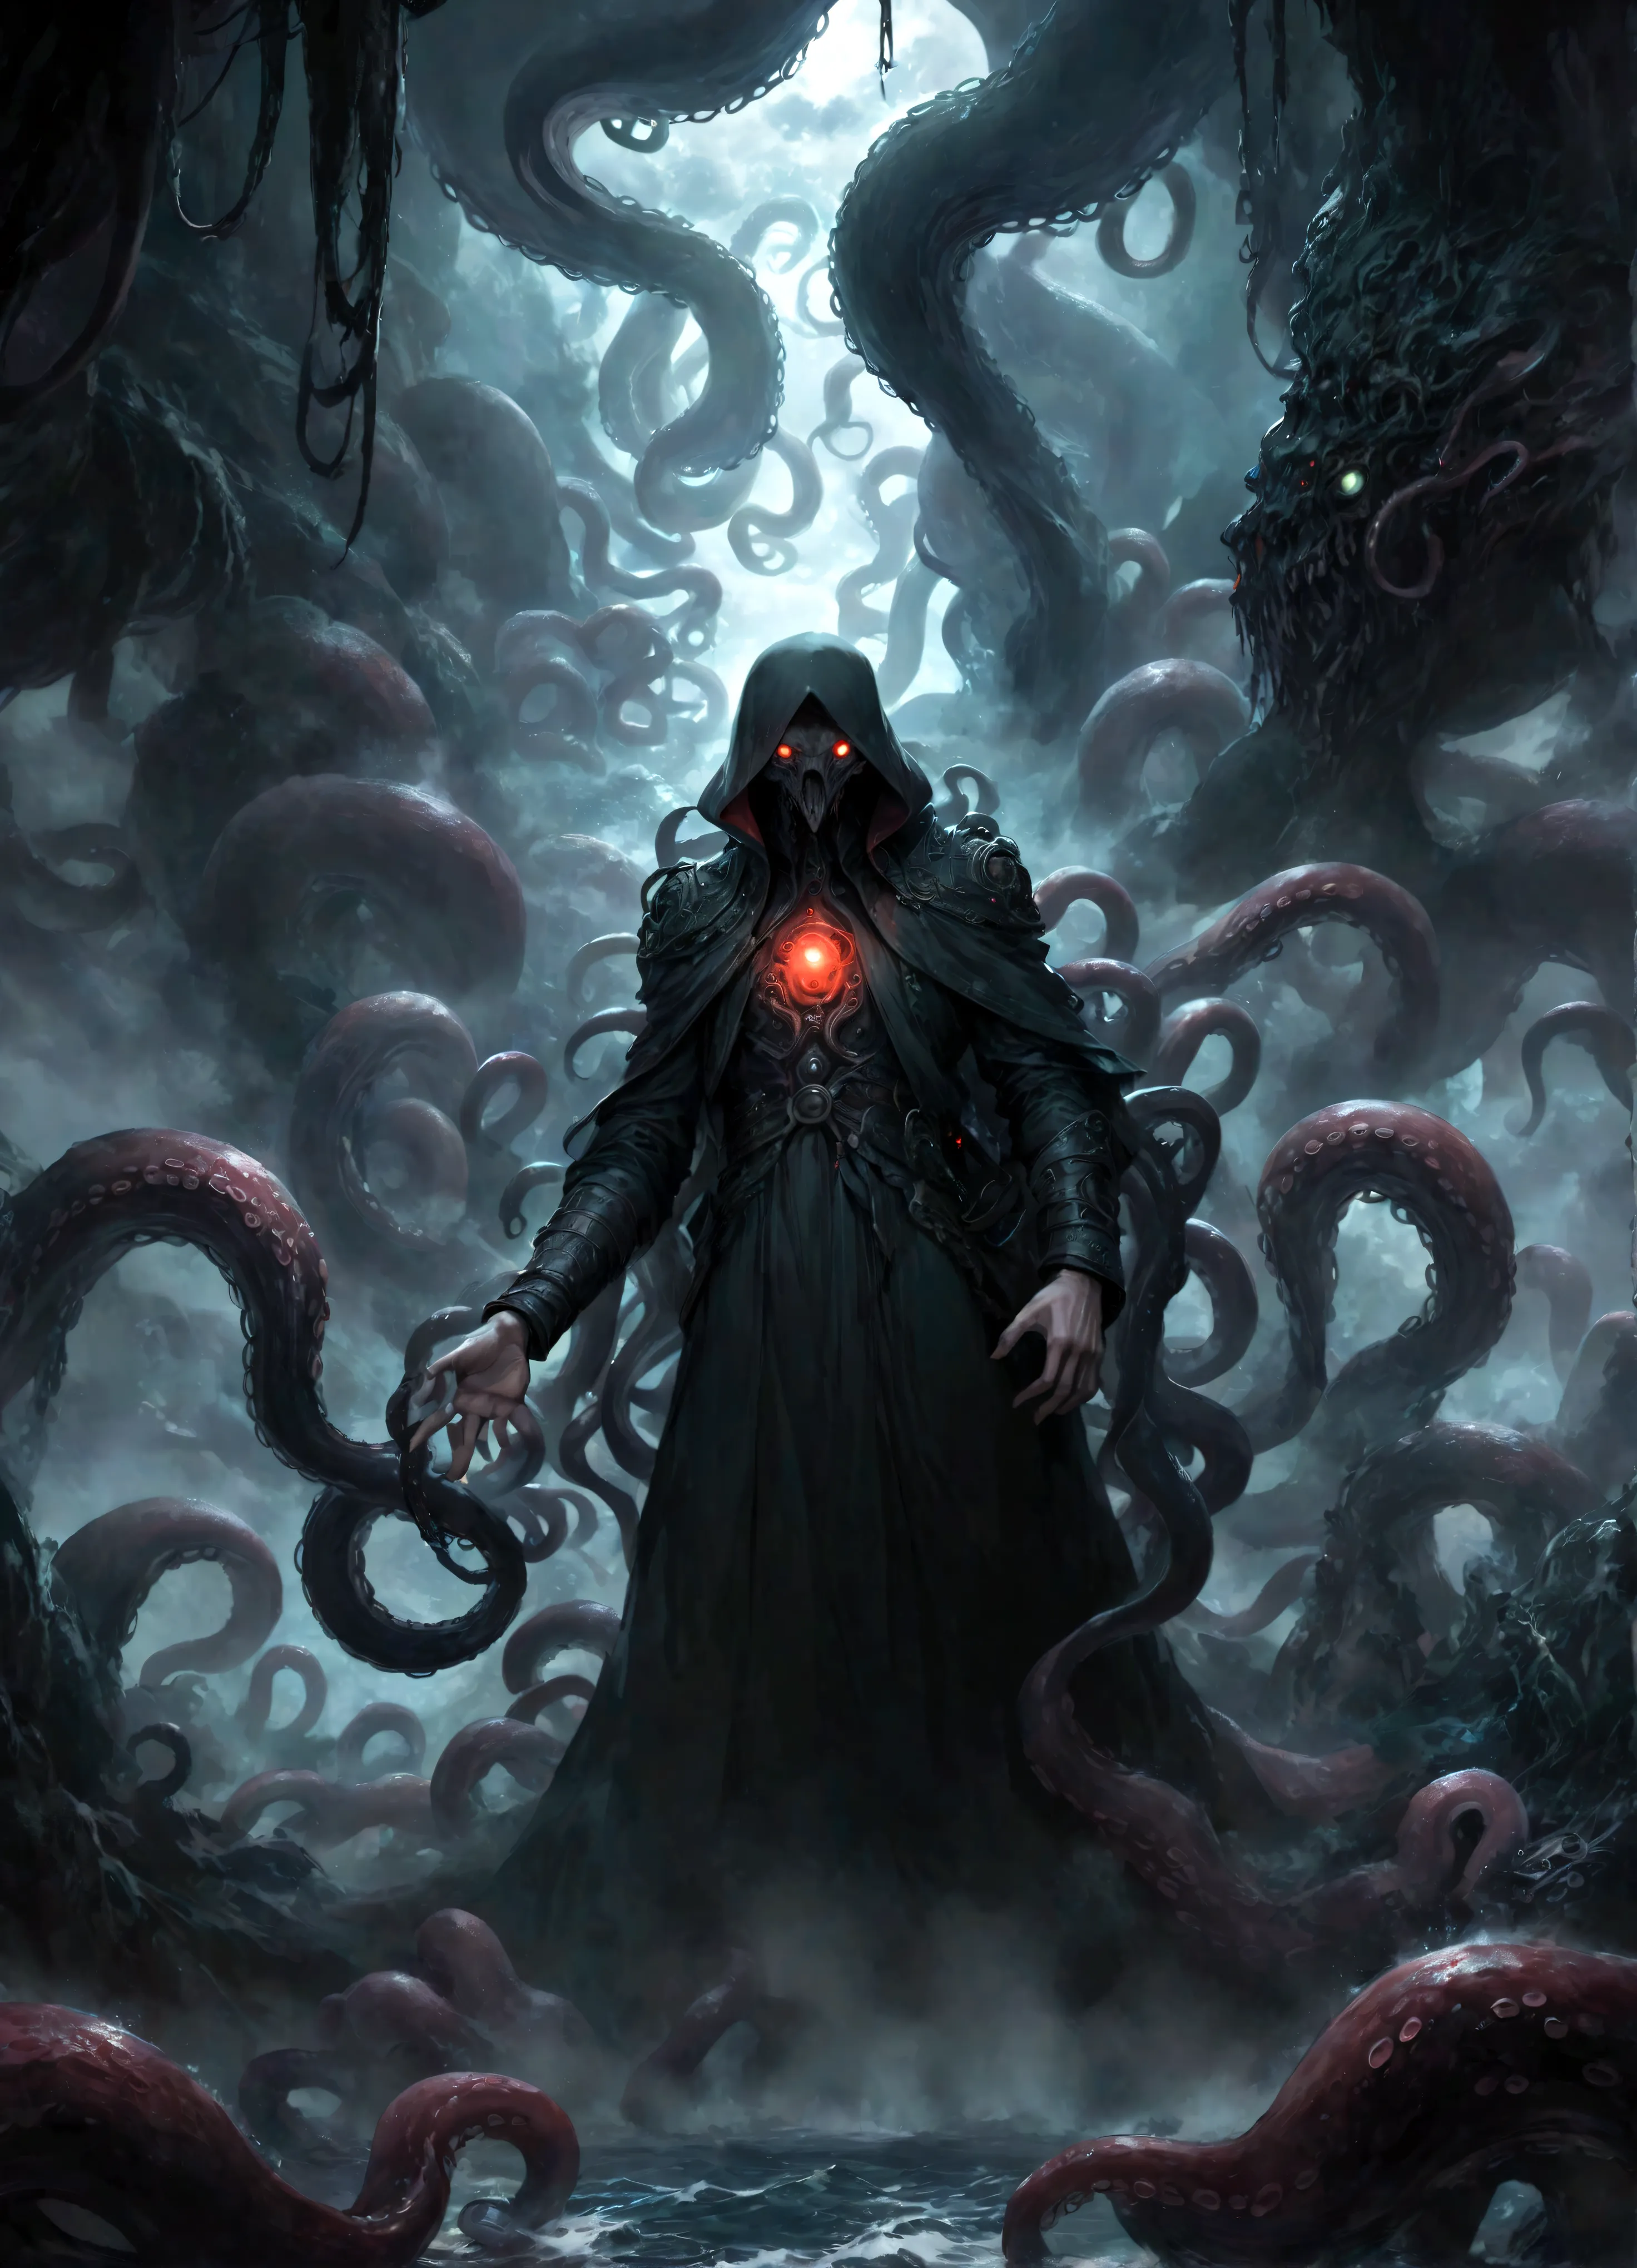 A dark fantasy scene depicting the terrifying creature Cthulhu,emerging from the abyss. The monstrous figure,shrouded in shadows...